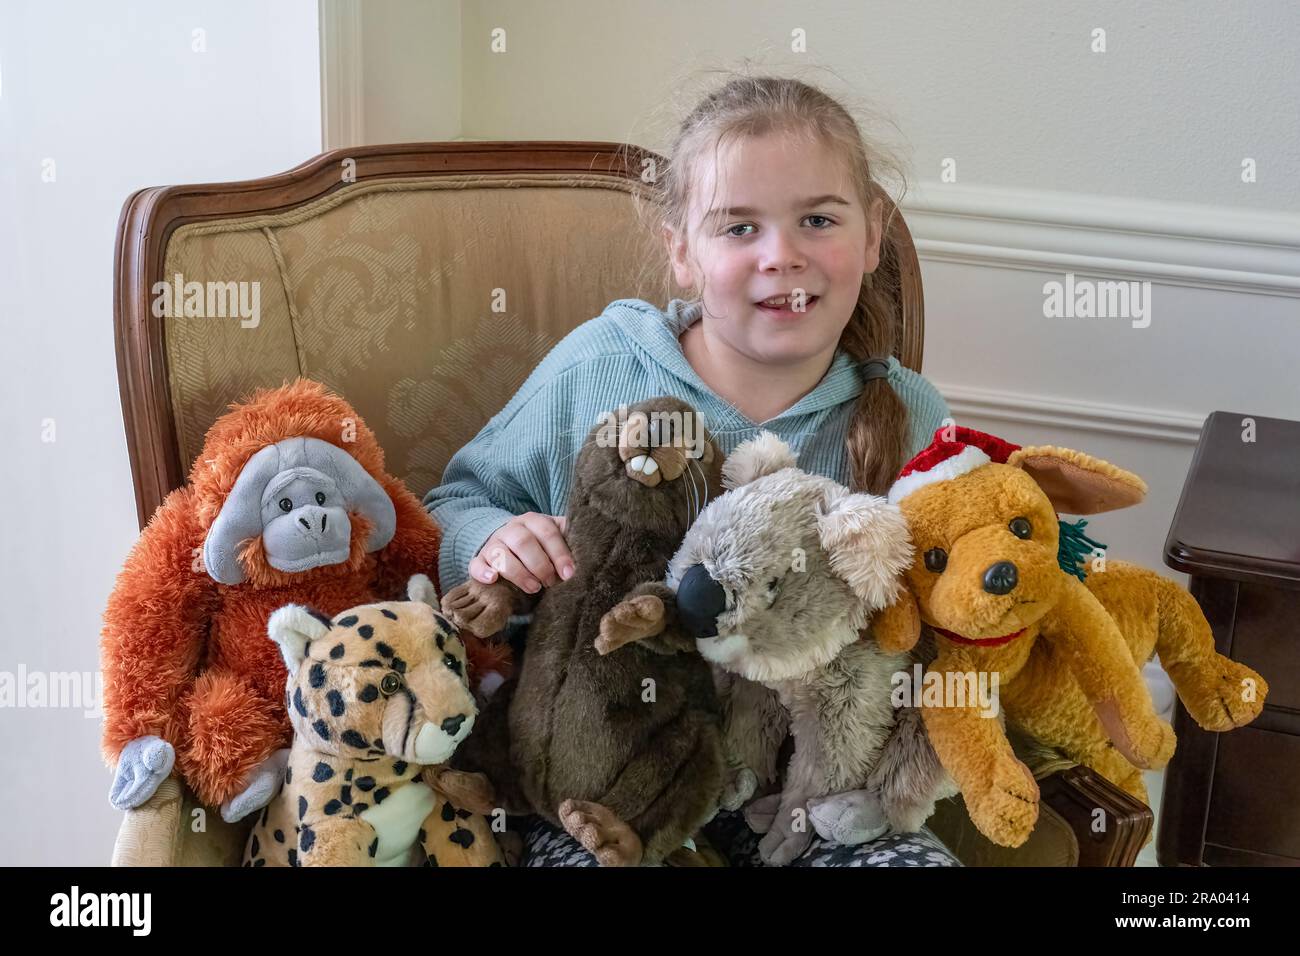 Portrait of a 7 year old girl sitting in an armchair surrounded by stuffed animals  (MR) Stock Photo